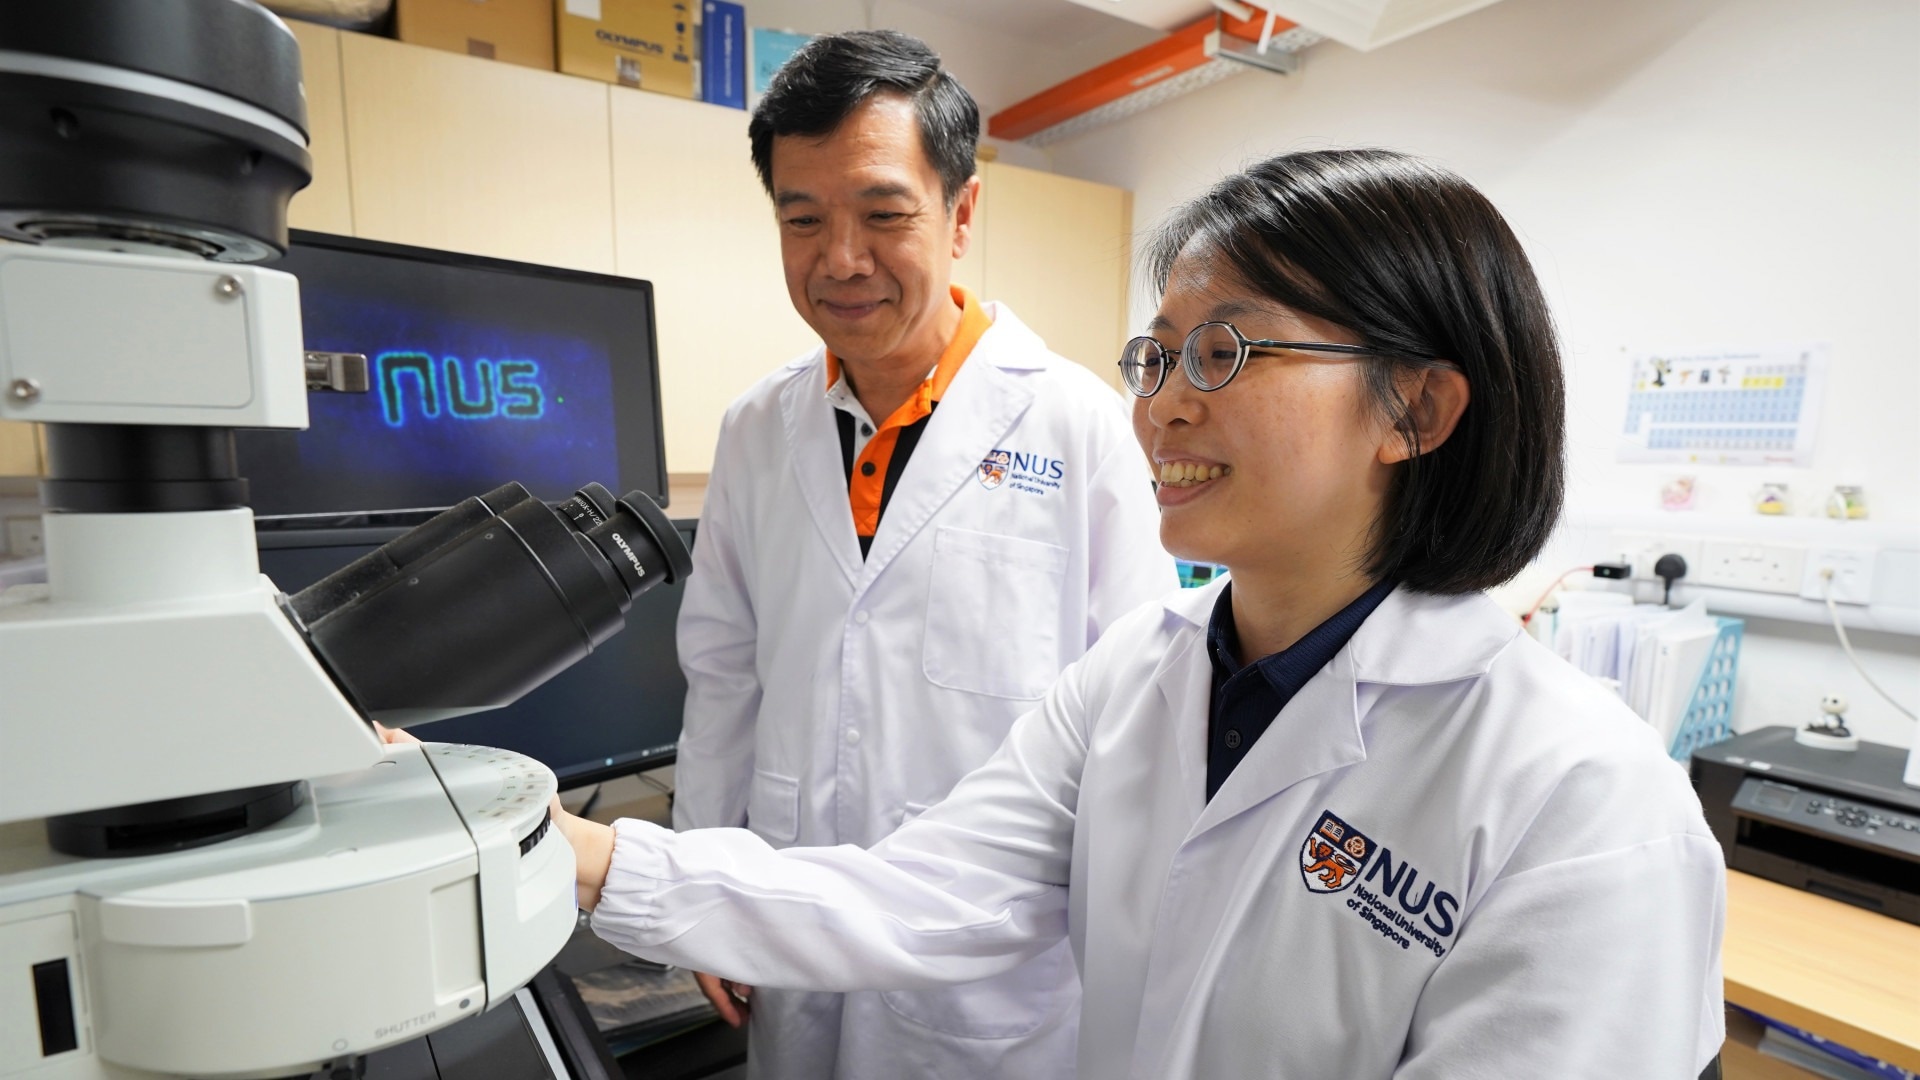 Prof Sow Chorng-Haur (left) and Dr Sharon Lim from the NUS Department of Physics observe a glowing laser-engraved hair under UV light through a microscope.